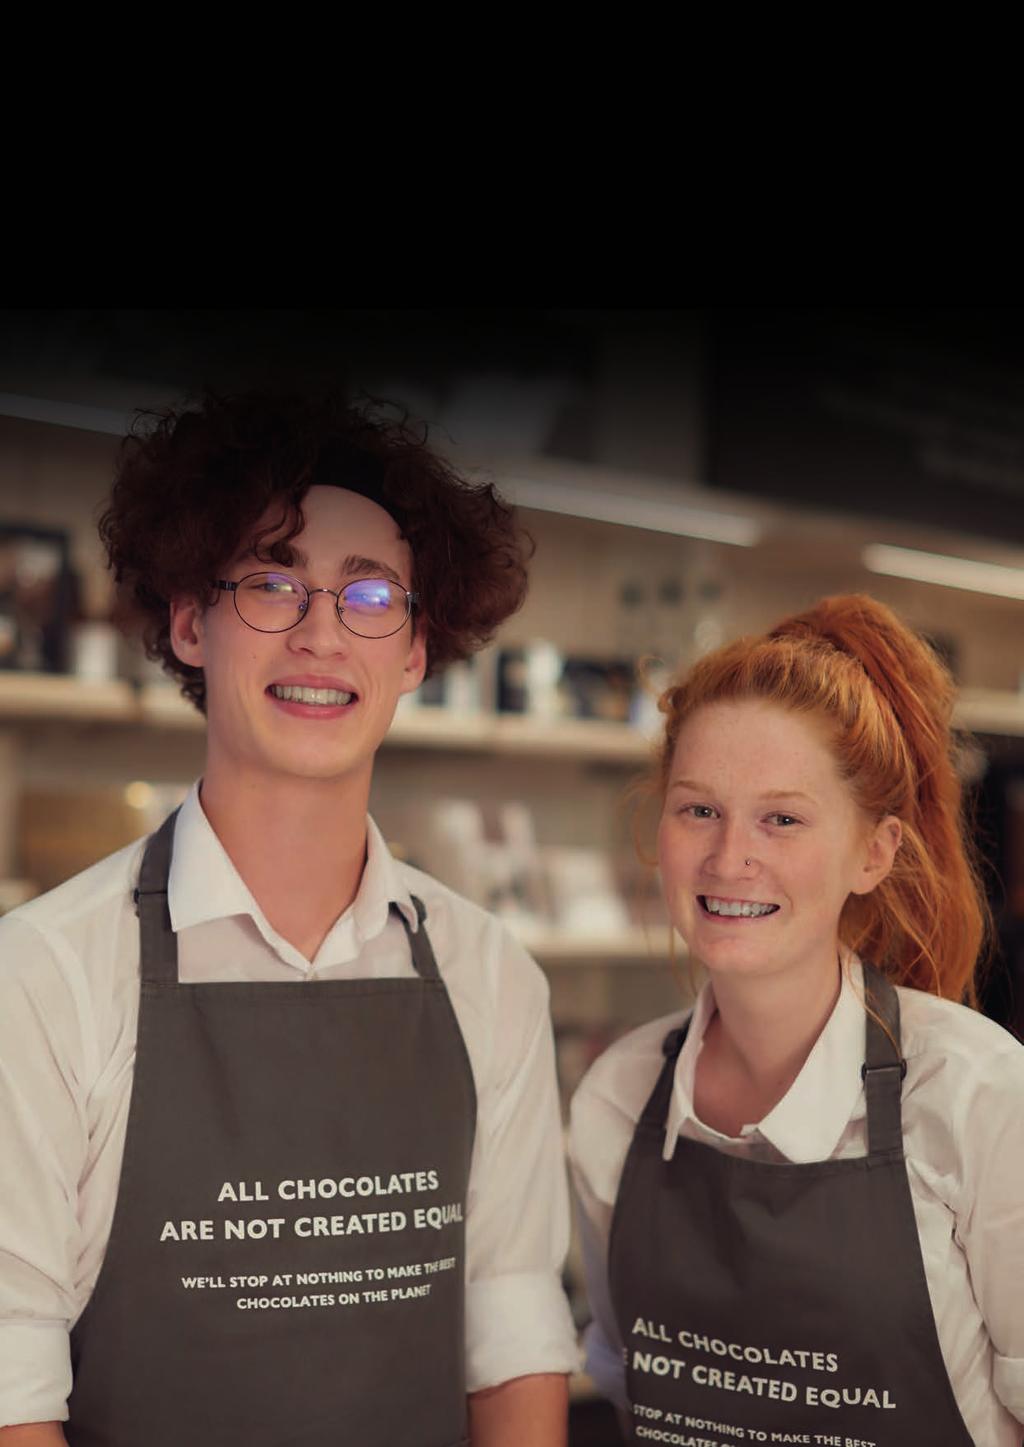 22 HOTEL CHOCOLAT GROUP PLC Annual Report and Accounts STRATEGIC REPORT Chief Executive's statement 23 Chief Executive s statement continued We have a relentless focus on making our customers